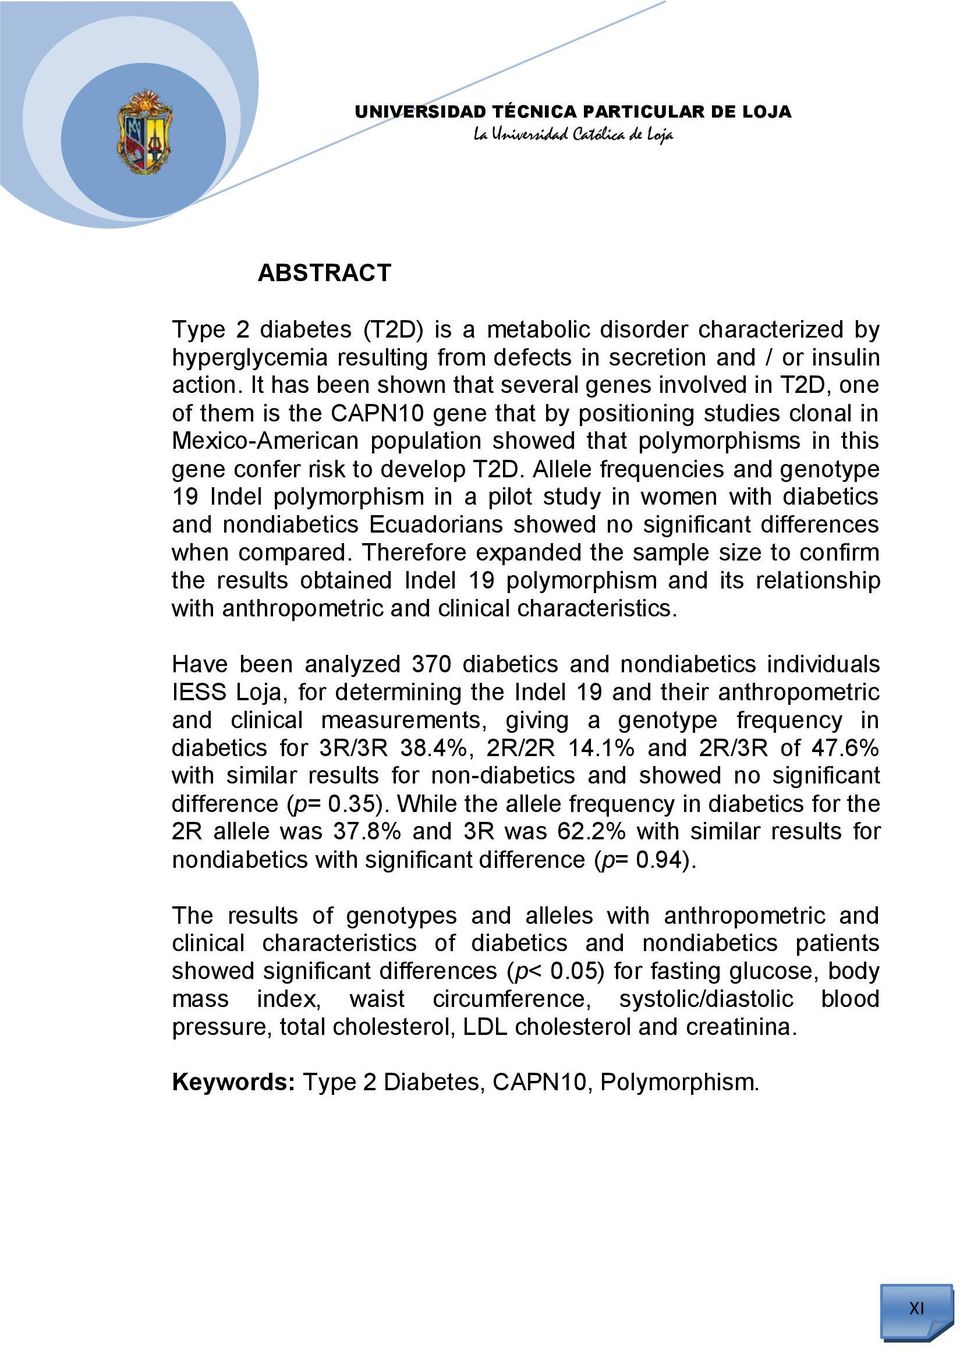 risk to develop T2D. Allele frequencies and genotype 19 Indel polymorphism in a pilot study in women with diabetics and nondiabetics Ecuadorians showed no significant differences when compared.